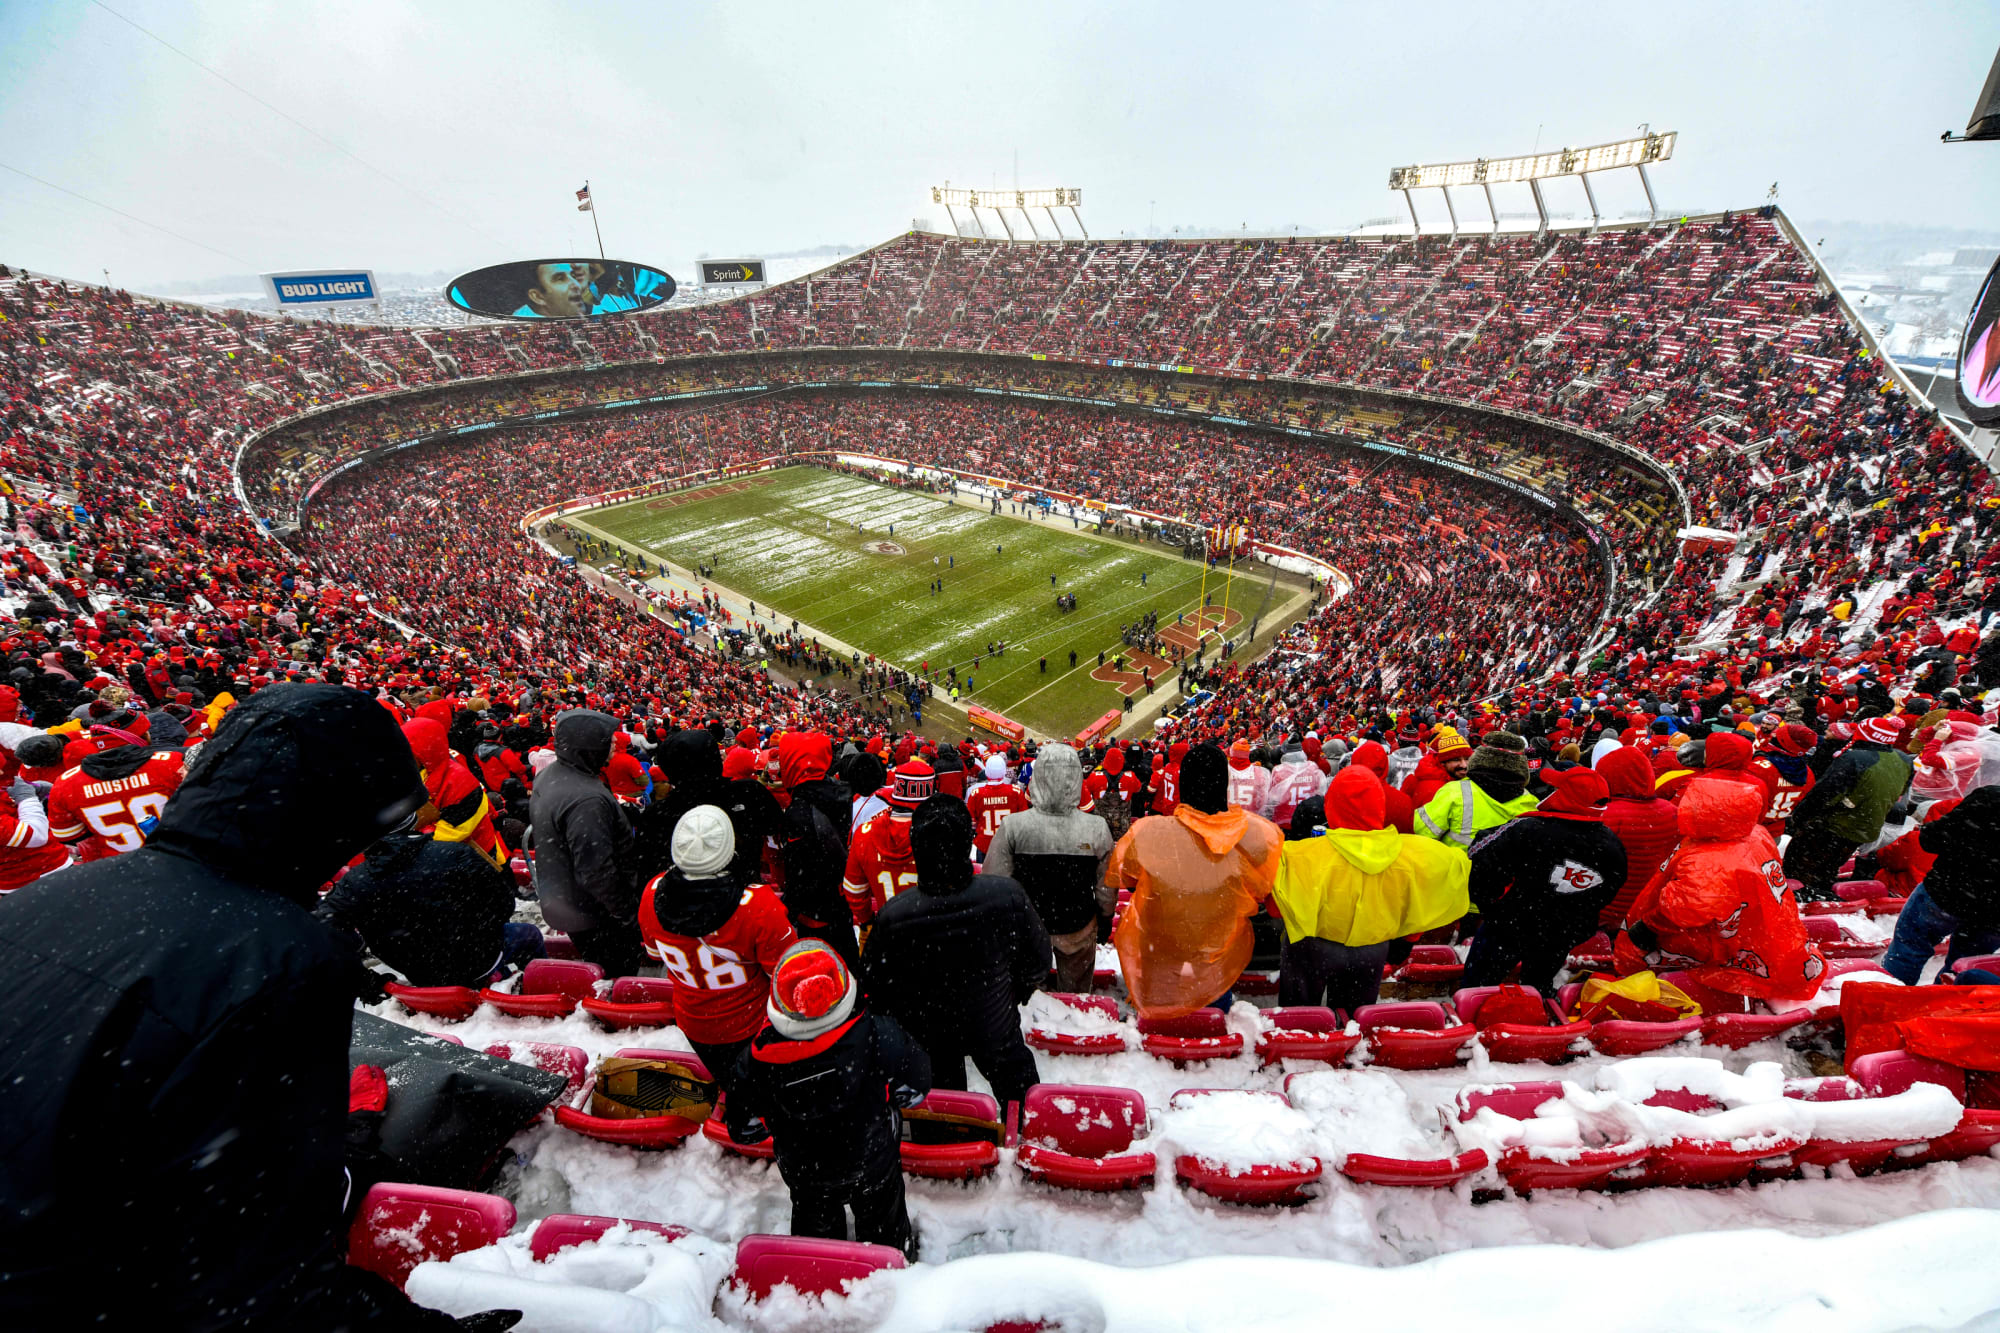 The Kansas City Chiefs are disregarding their fans with ticket changes